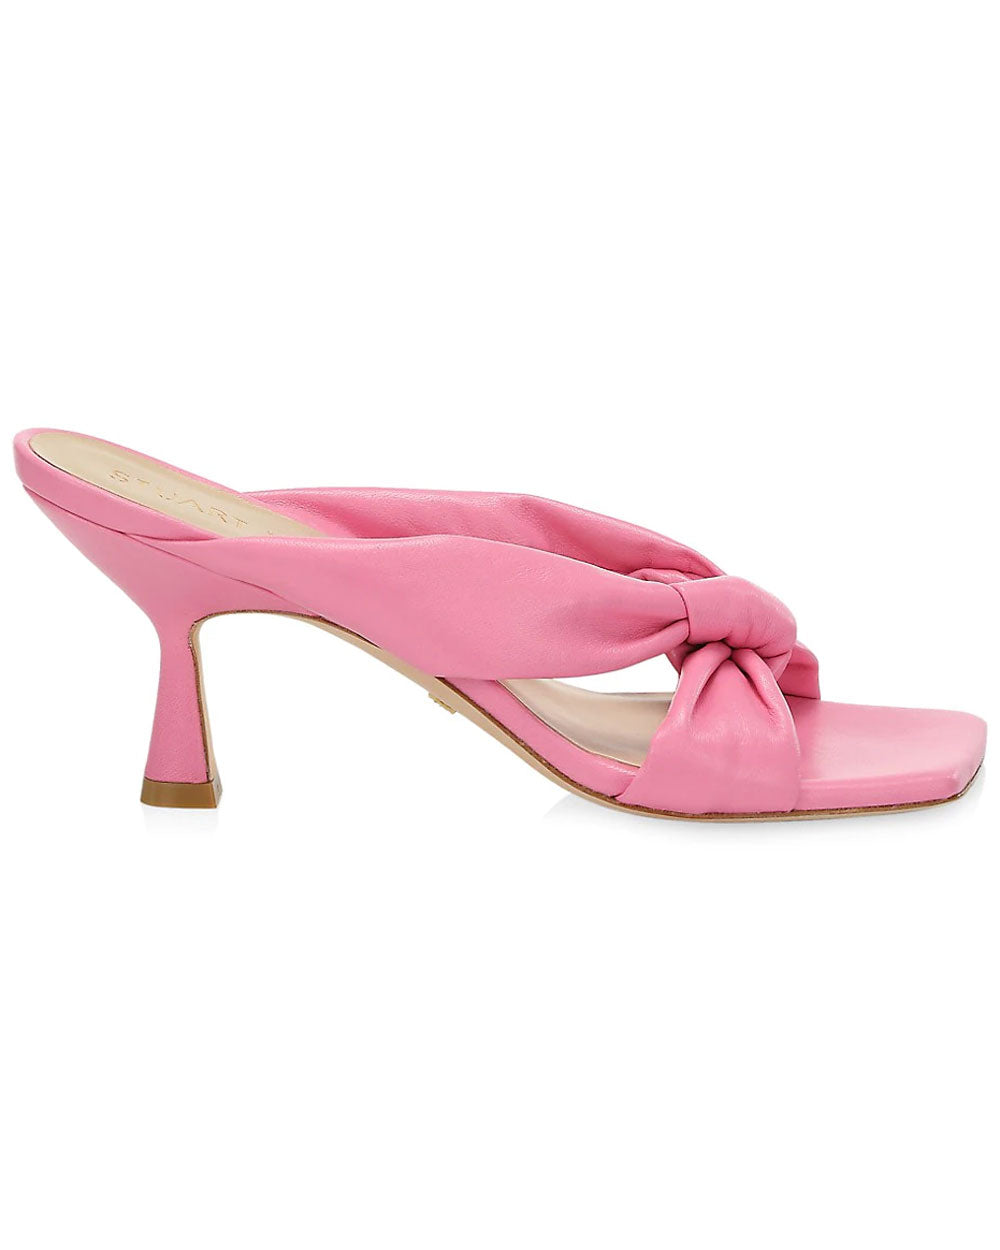 Playa 75 Knot Sandal in India Pink